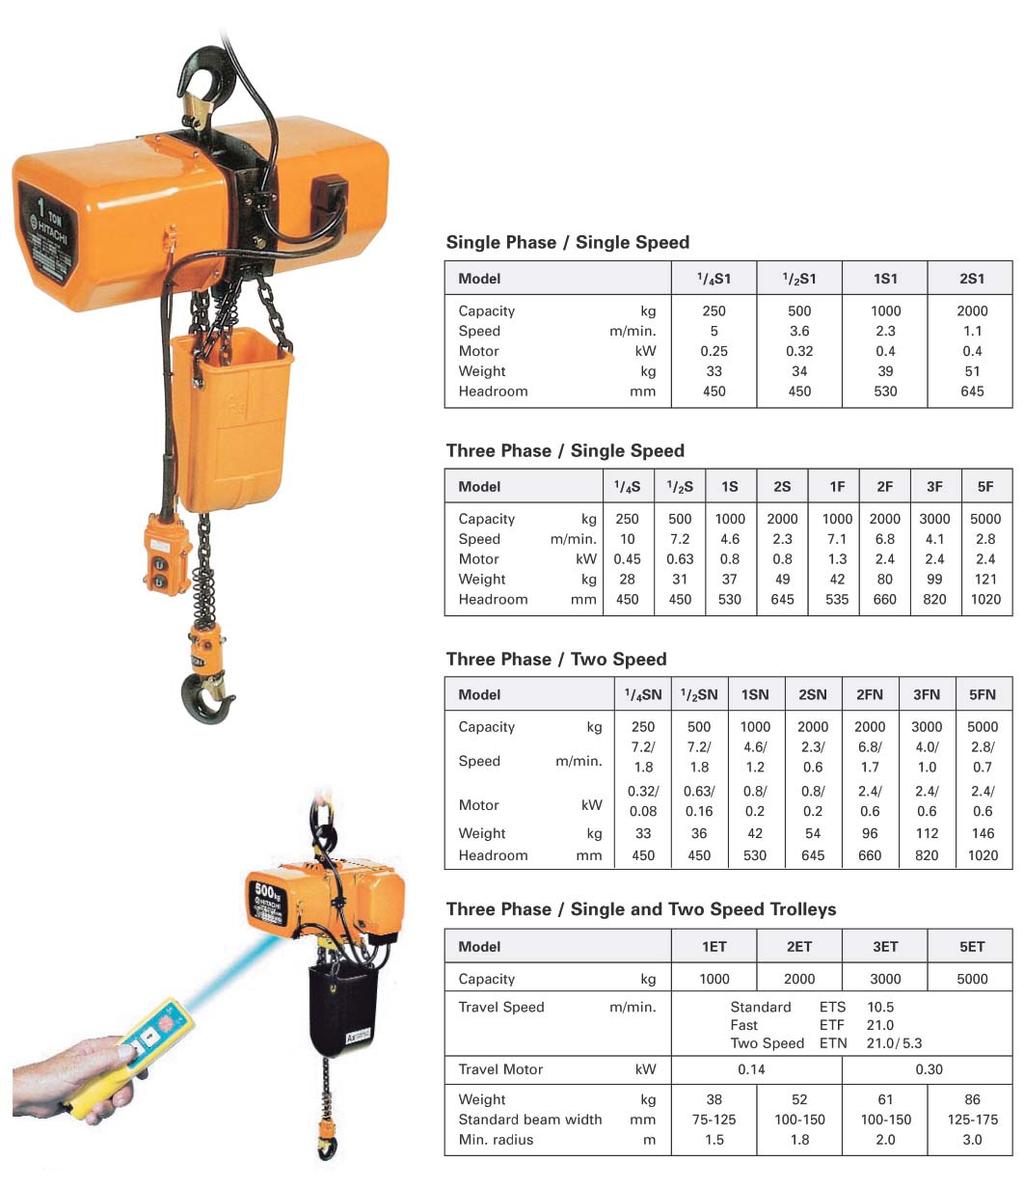 HITACHI ELECTRIC CHAIN HOISTS Capacities: 250kg to 5 tonnes Low voltage 24V at push button controls